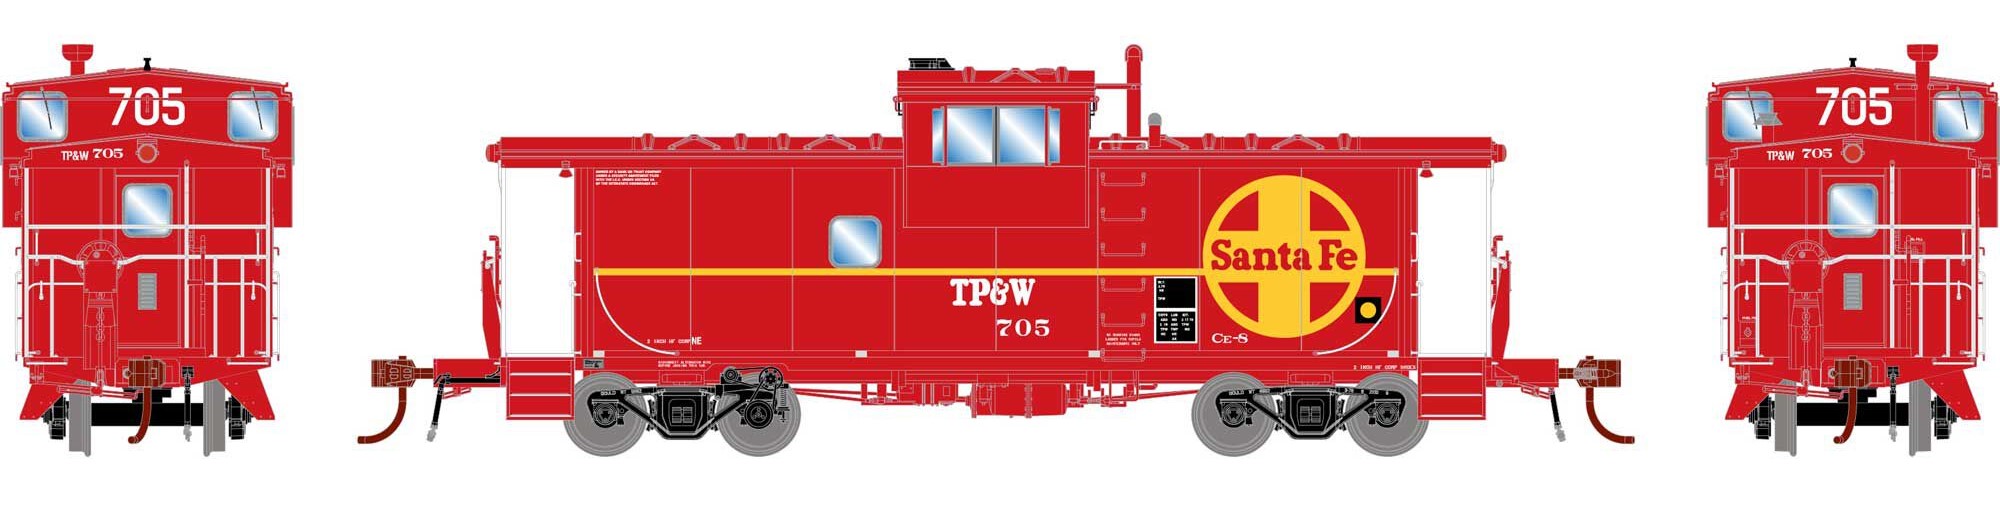 Athearn Genesis HO ATHG78580 DCC/NCE Equipped ICC Caboose With Lights Santa Fe Class CE-8 TP&W #705